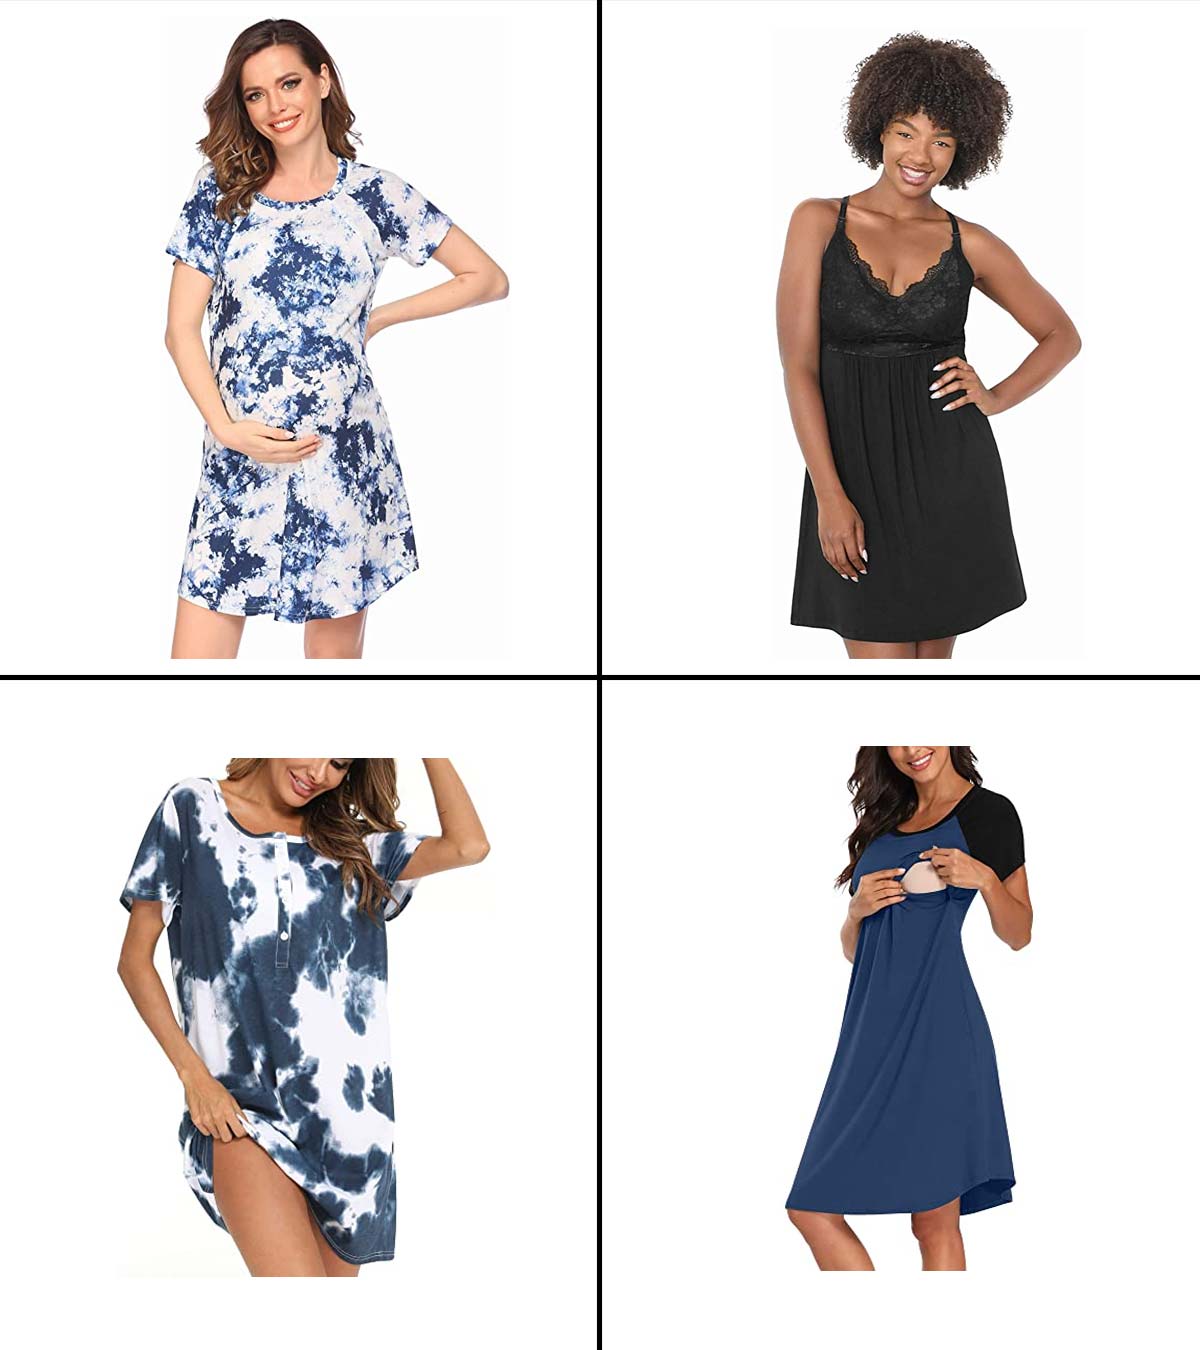 Nursing Nightgowns with Built-in Bra